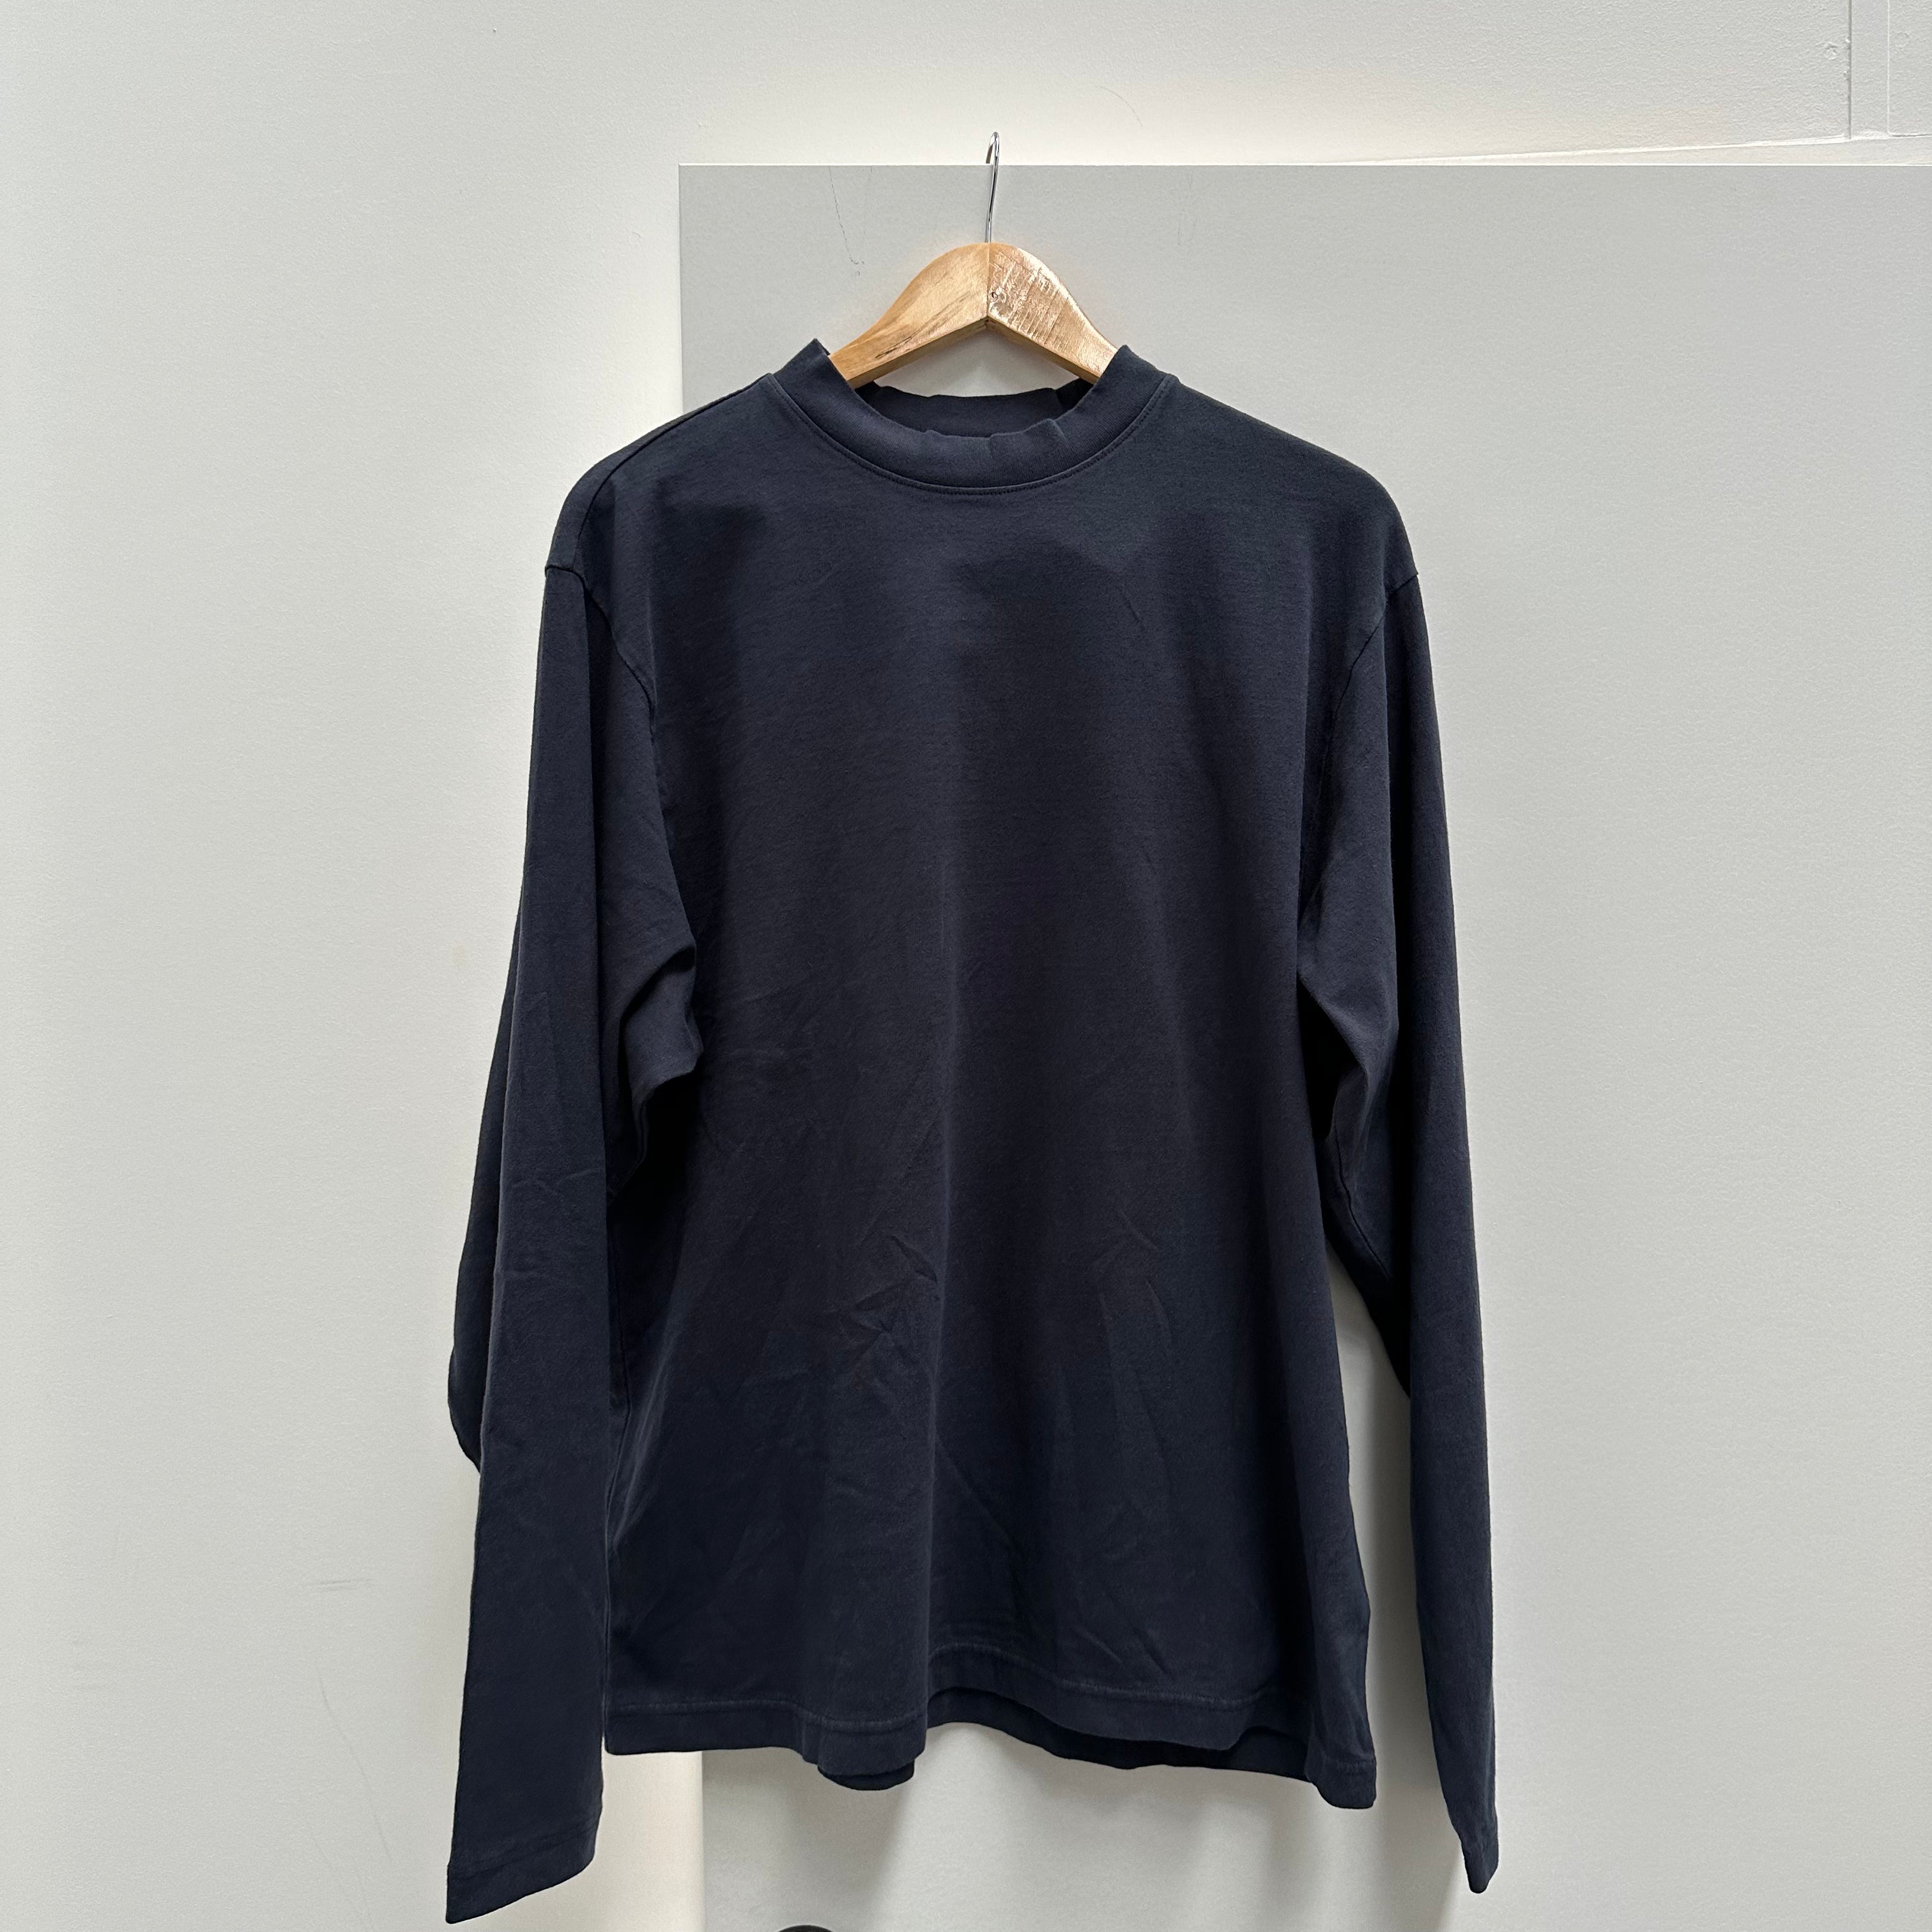 Yeezy x Gap Long Sleeve Navy – Curated by Charbel